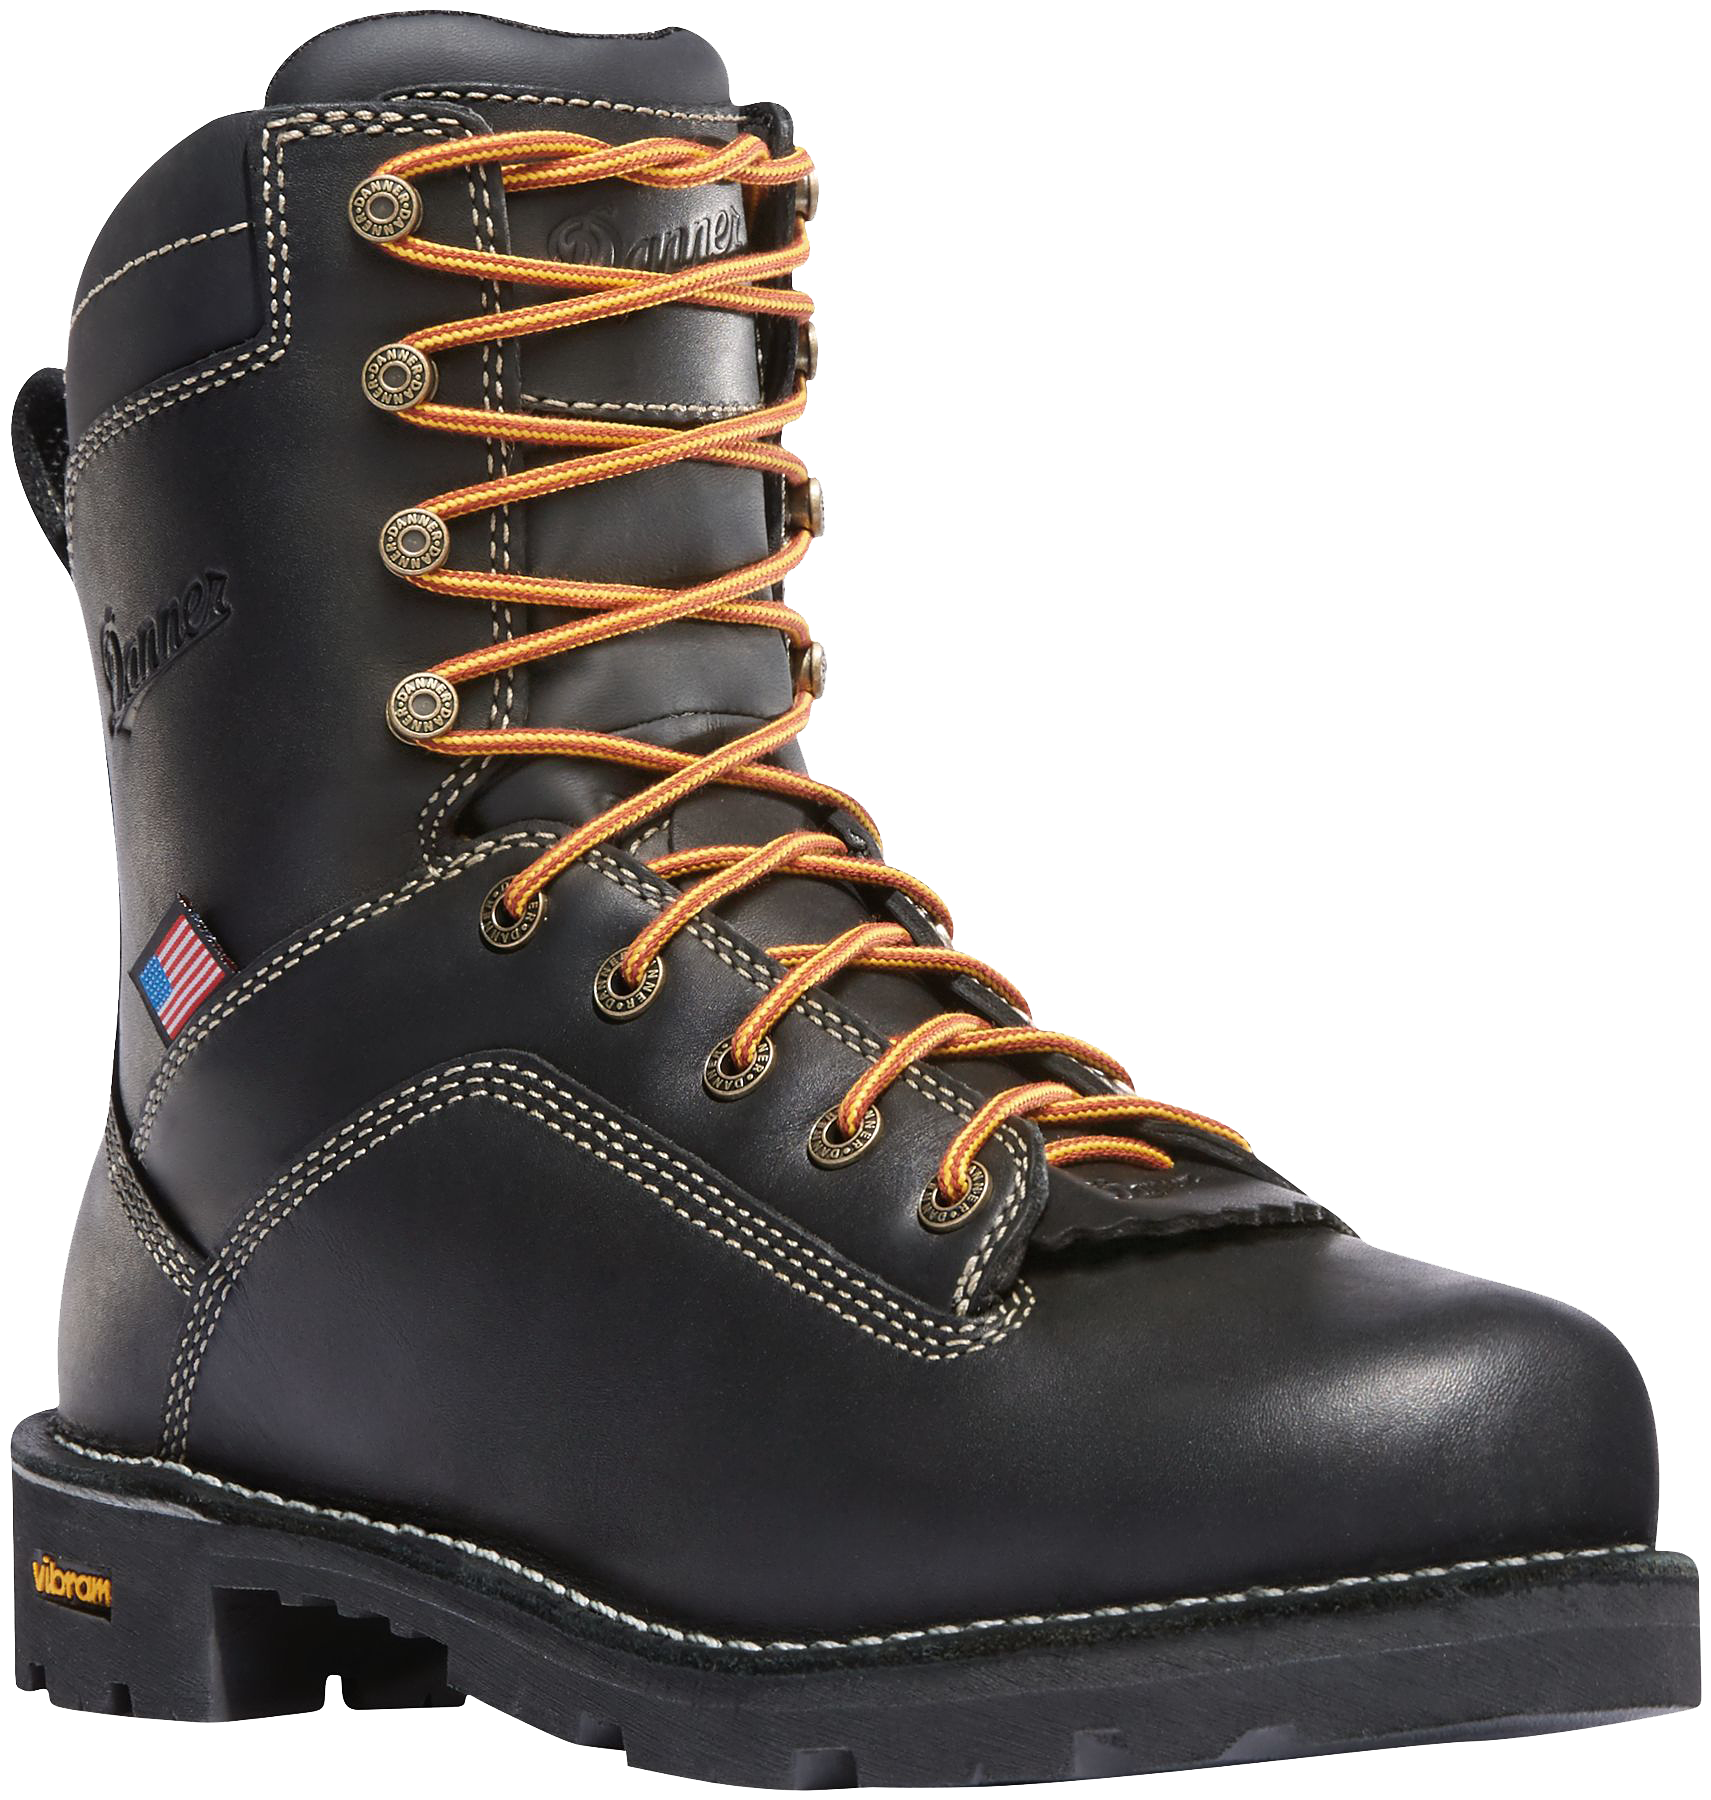 Danner Quarry USA Brown GORE-TEX Alloy Toe Work Boots for Men - Black - 9.5M